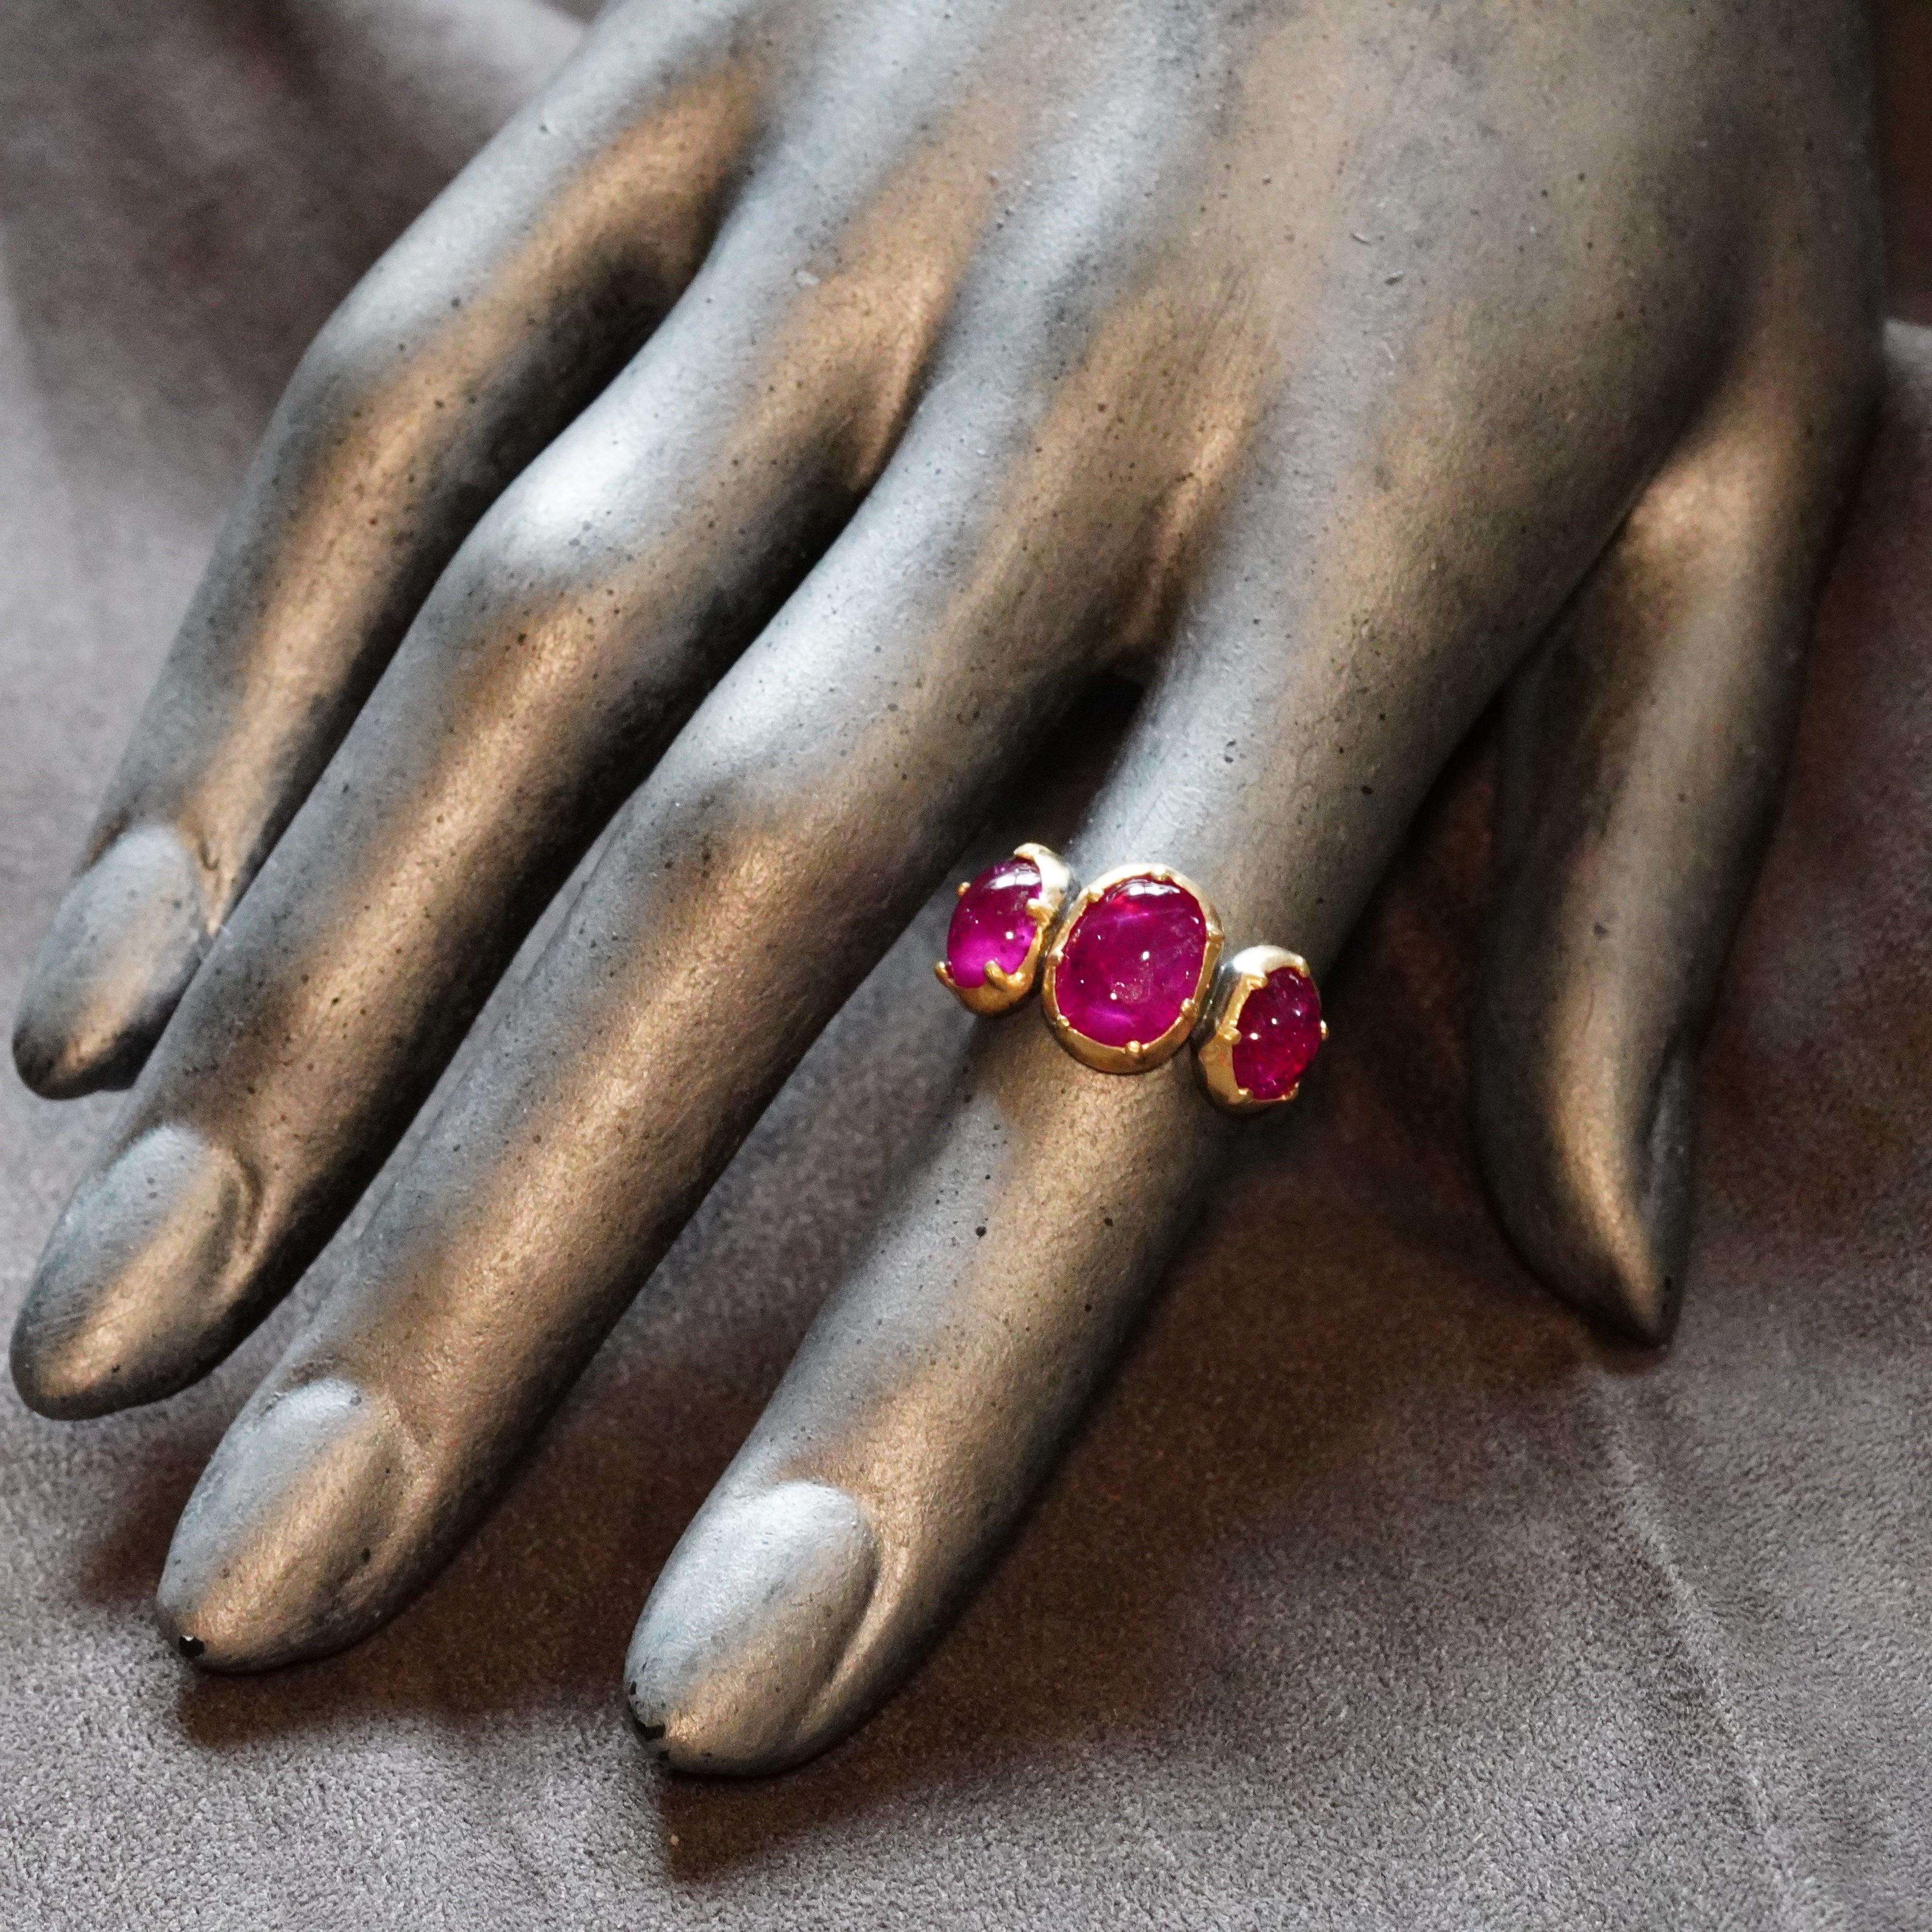 Victorian Style Ring - Handcrafted Three-Stone Burmese Ruby Ring by Anup Jogani